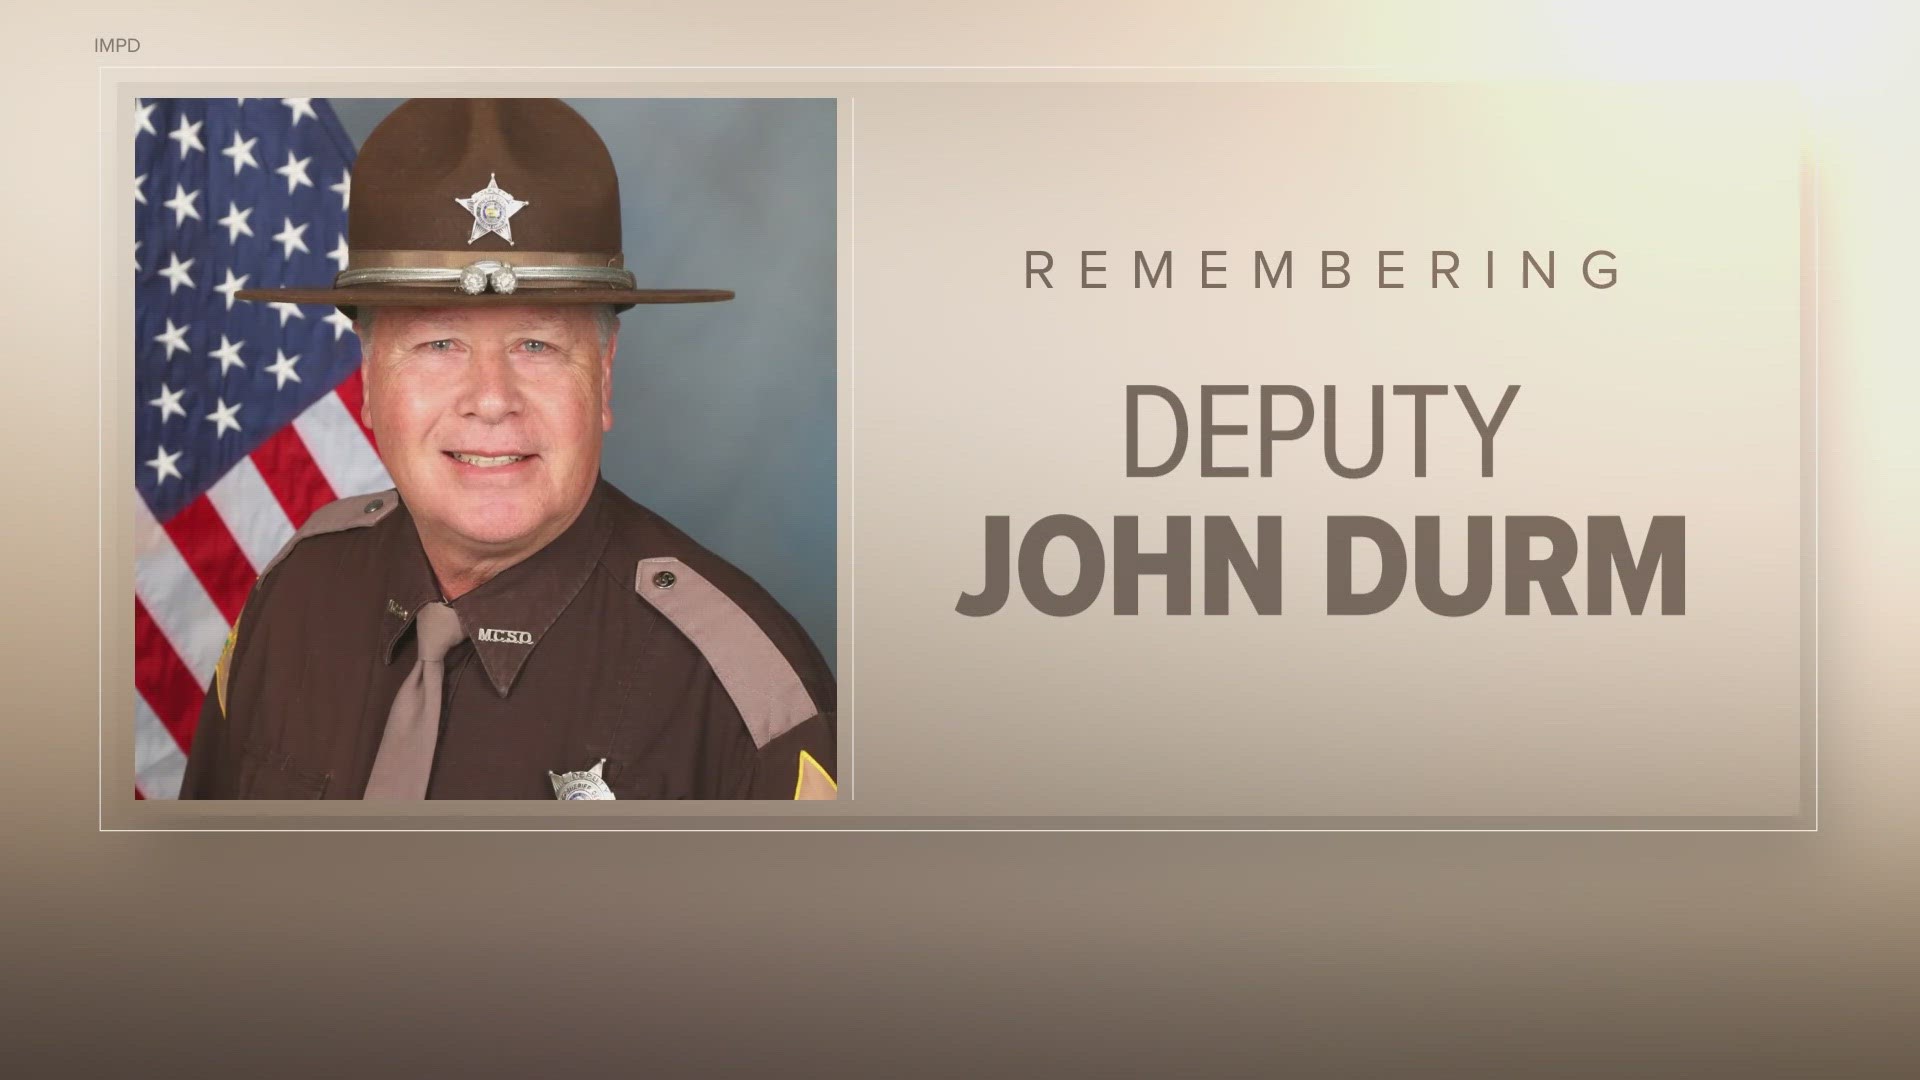 Deputy John Durm, 61, was returning from Eskenazi Hospital with an inmate when the prisoner attacked him outside of the Criminal Justice Center.